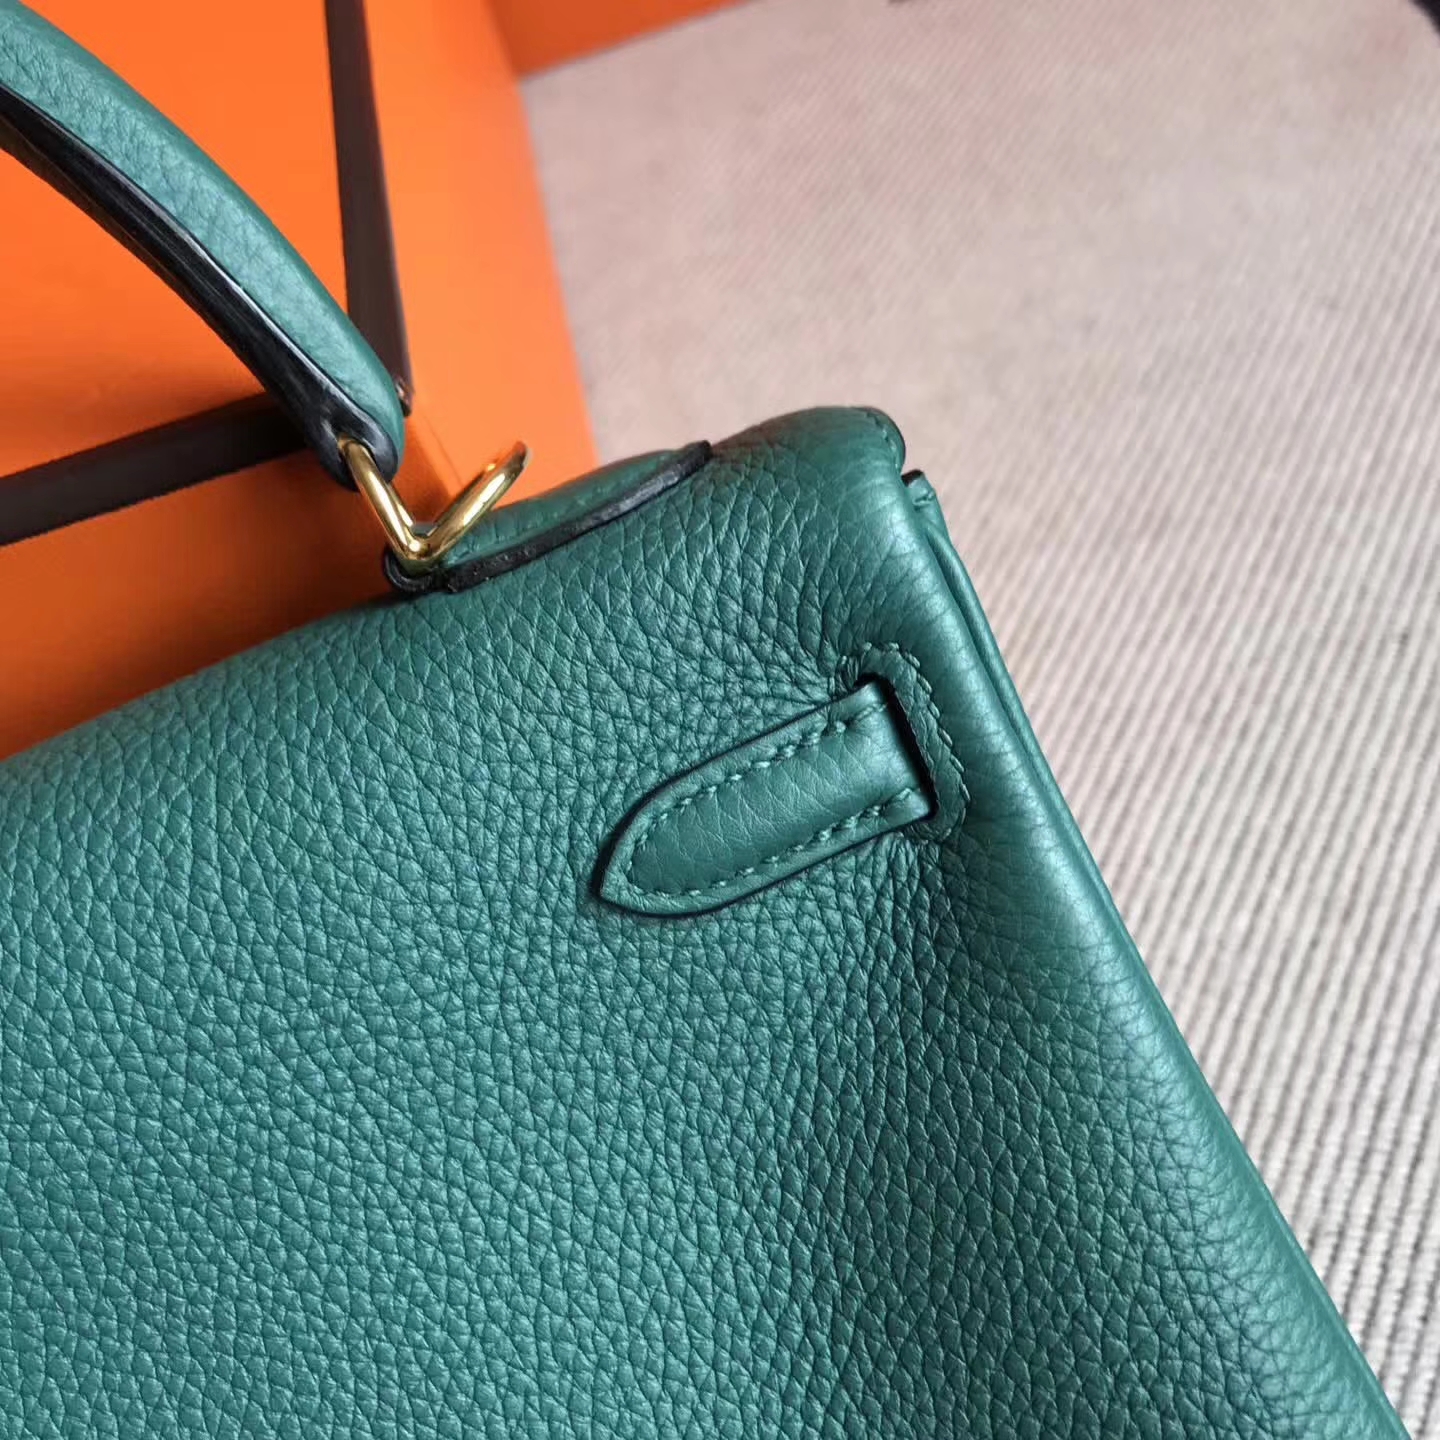 New Arrival Hermes Z6 Malachite Green Togo Leather Kelly Tote Bag25cm